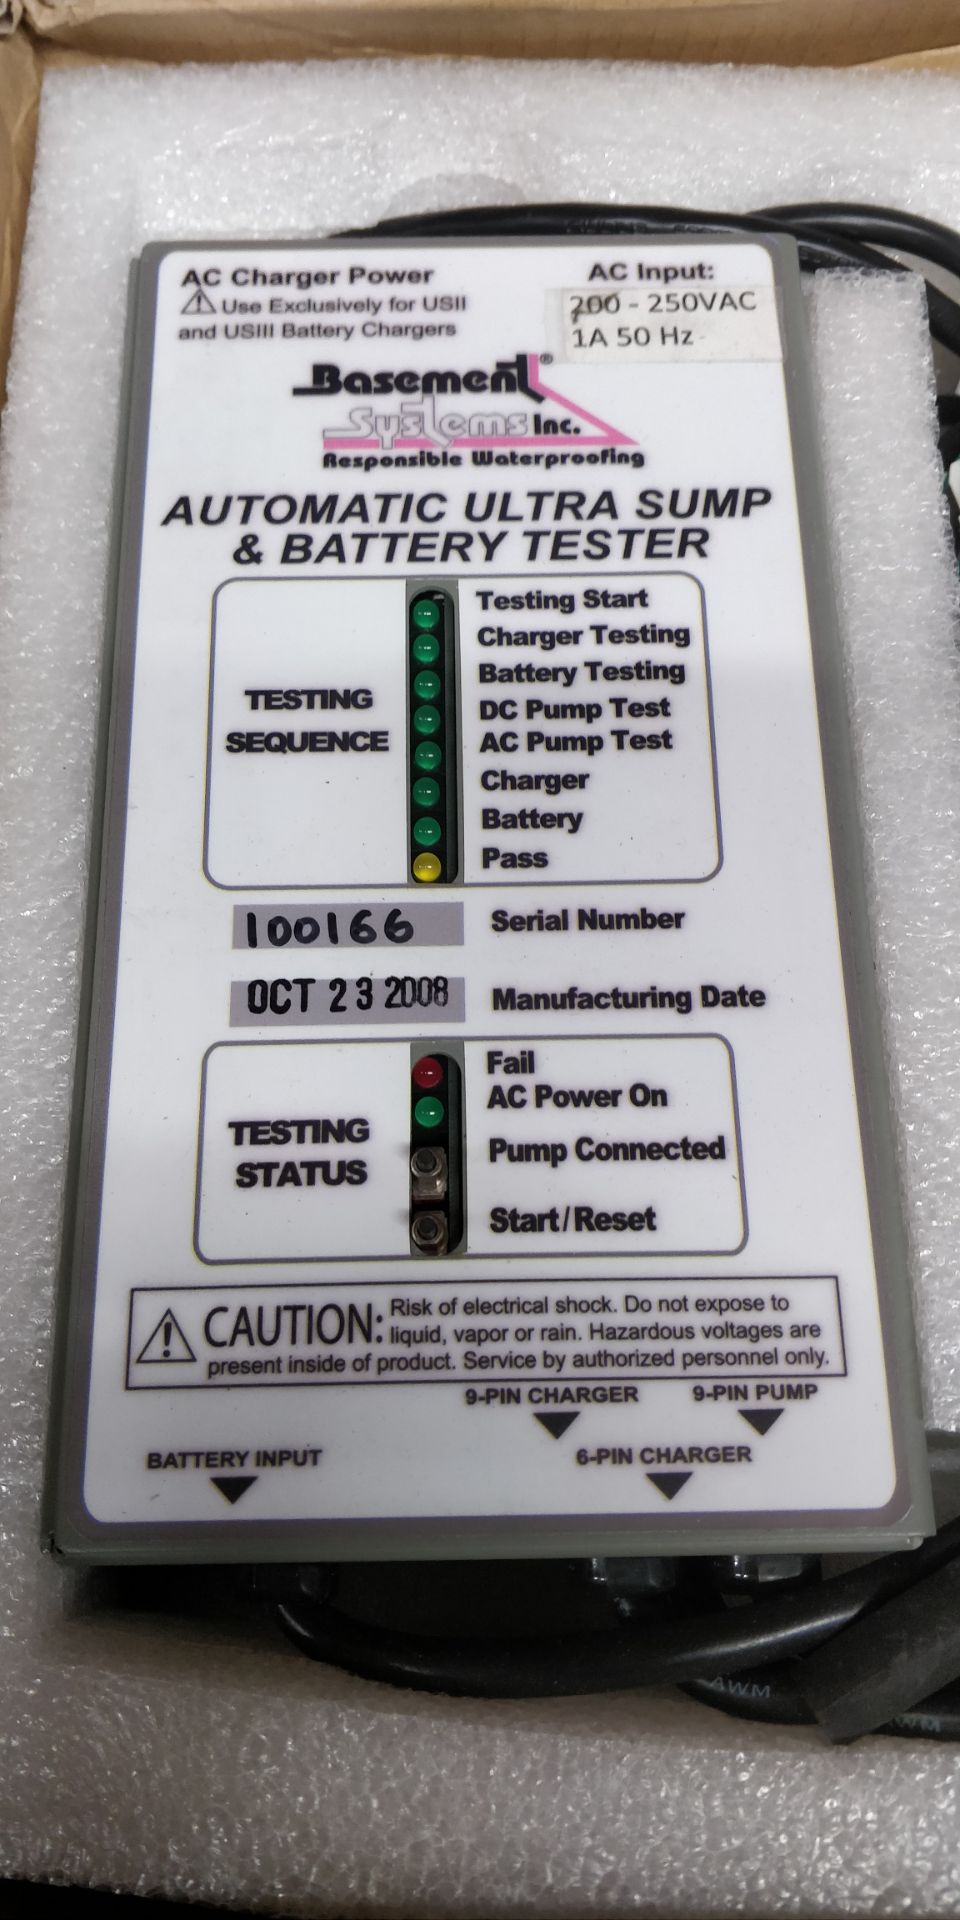 1 x Basement System Automatic Ultra Sump and Battery Tester - Model 92159 - New and Boxed - - Image 6 of 6